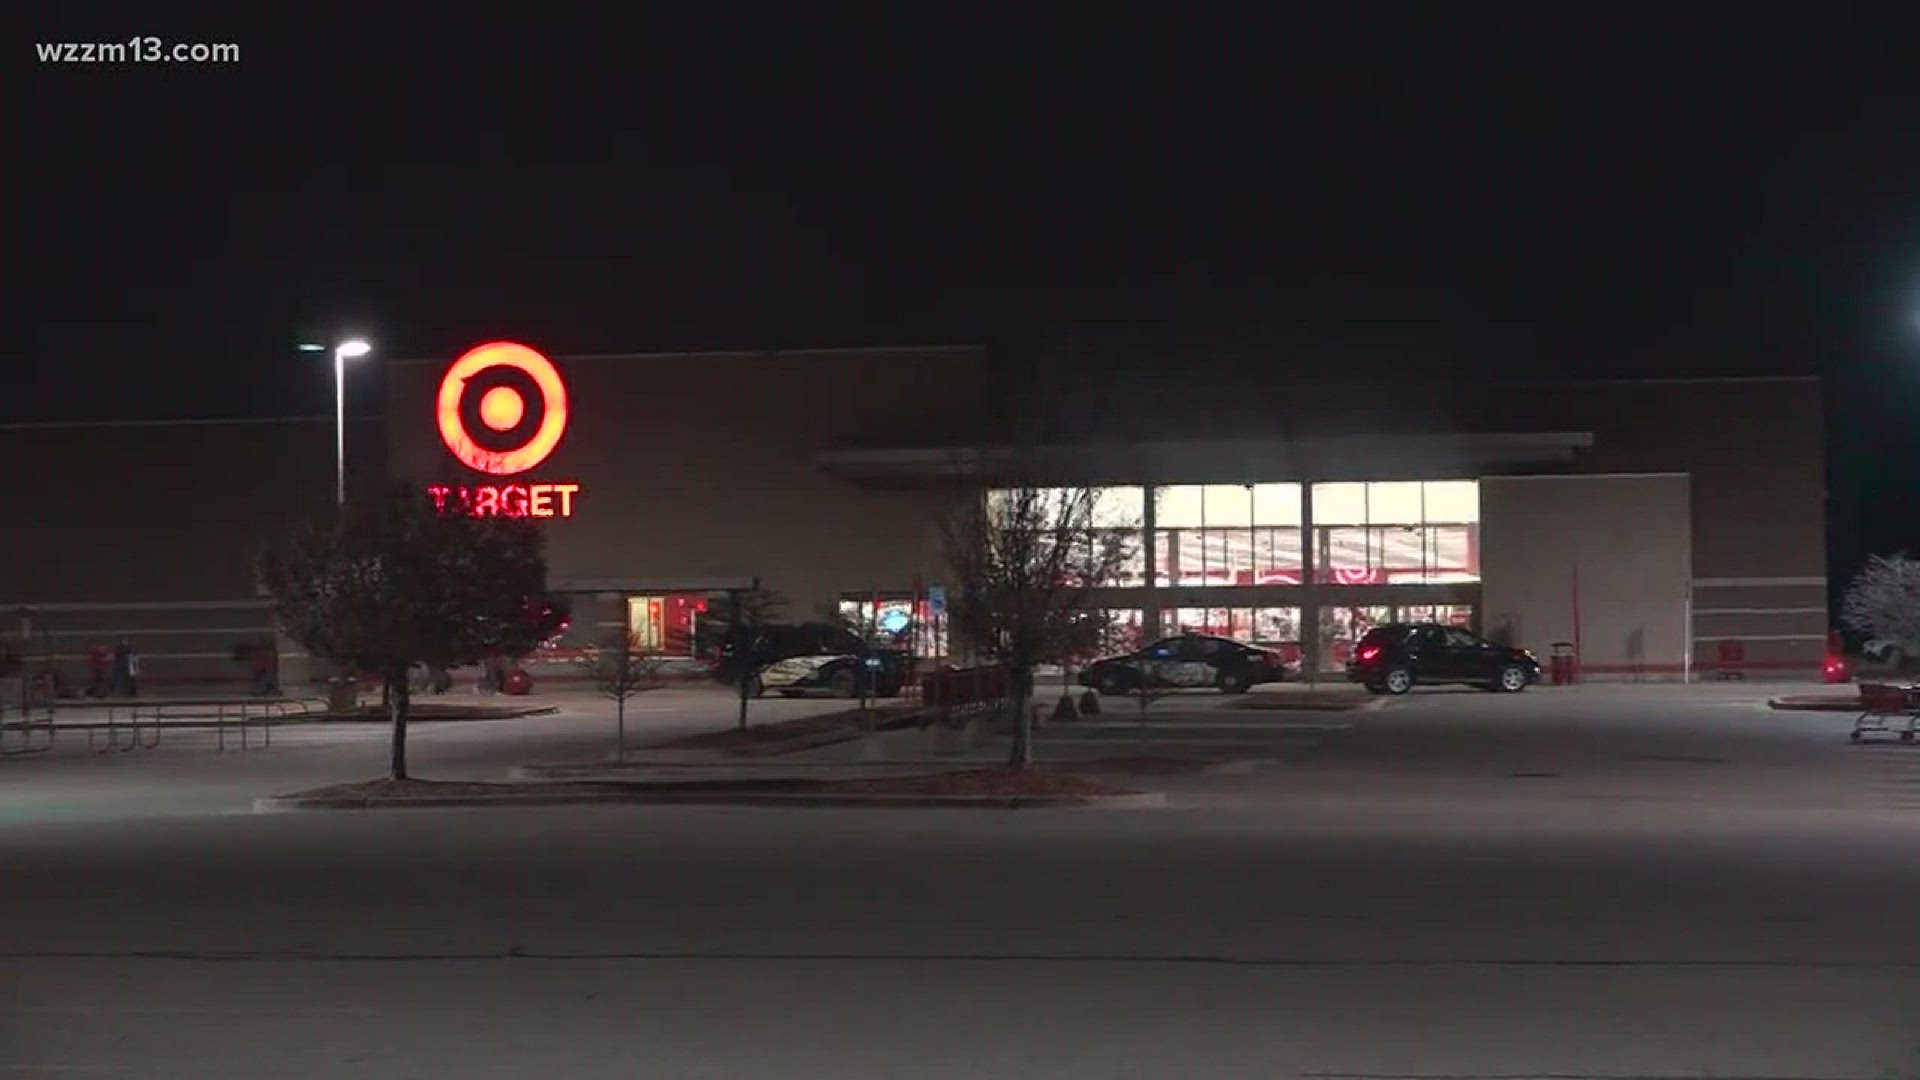 A bomb threat was called in to the store, but nothing was found when they searched the store.